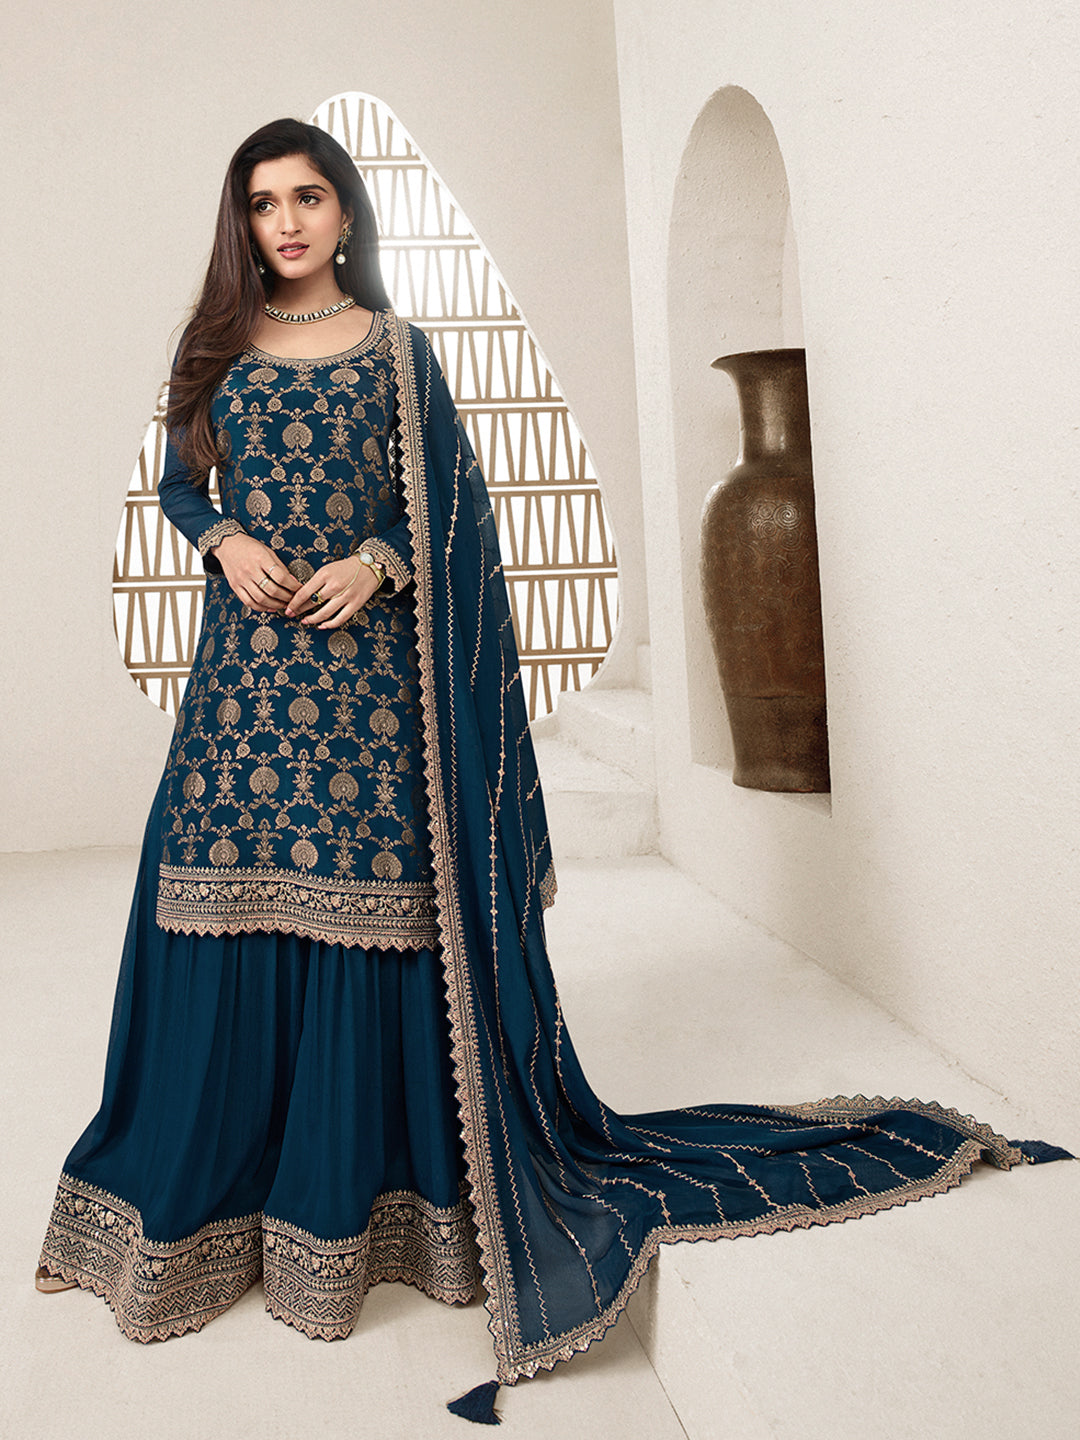 Dark Teal Jacquard with Embroidery Sharara Suit Set Product vendor